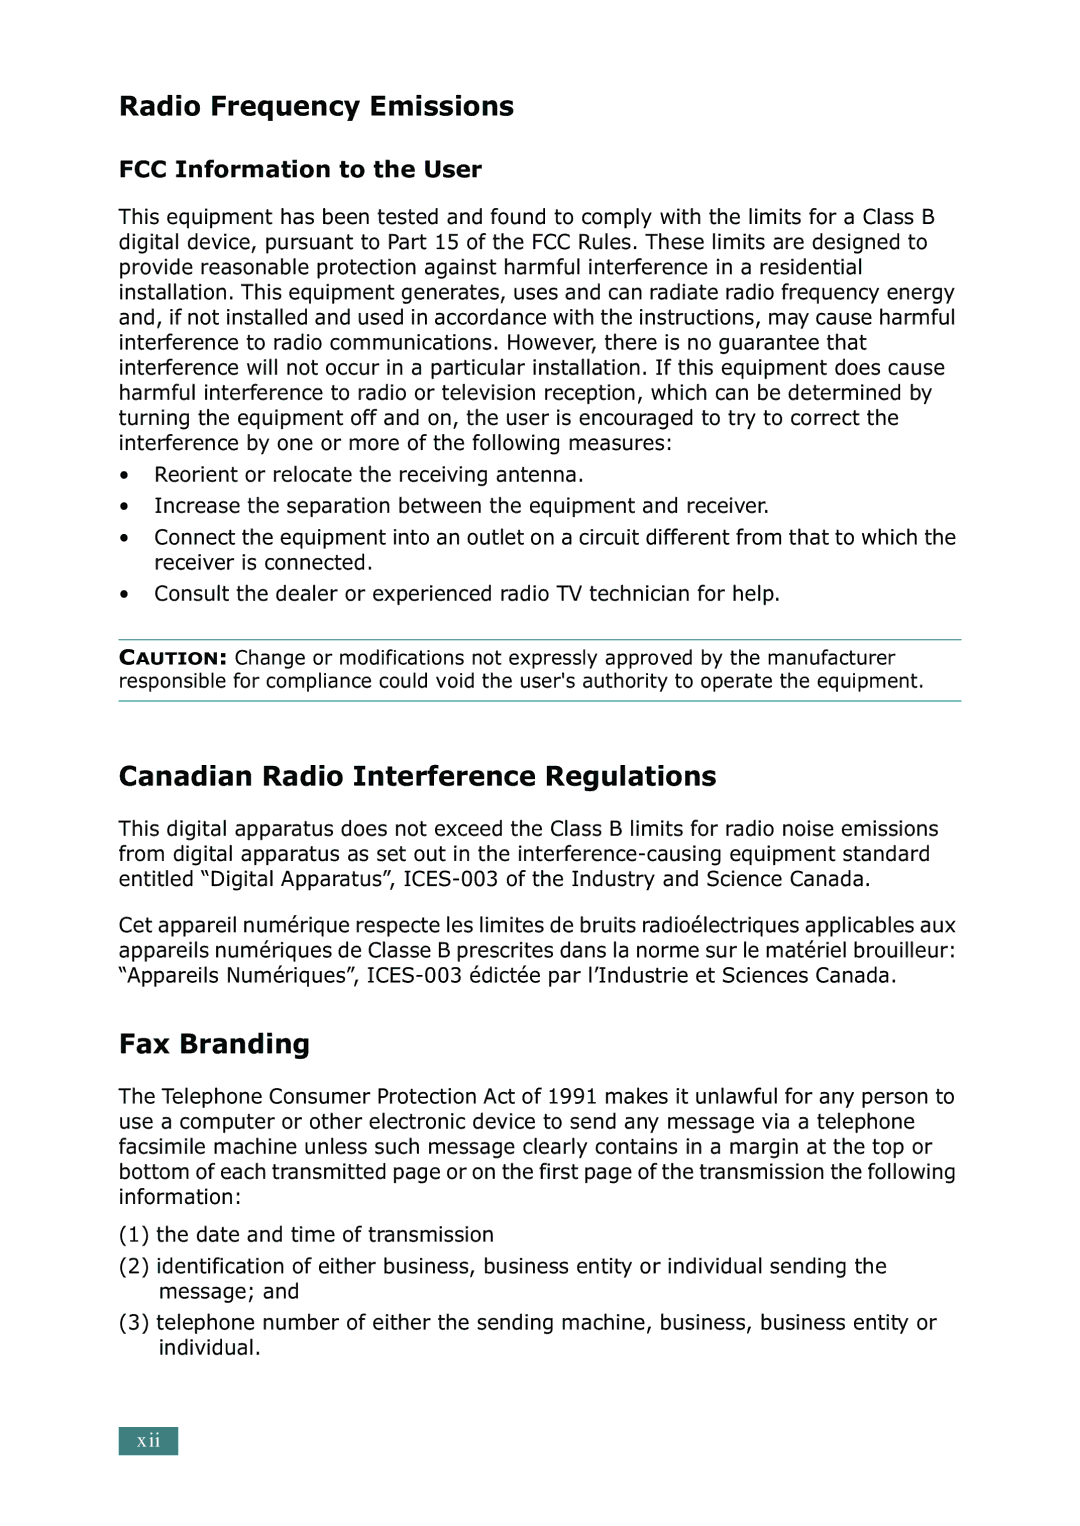 Samsung SF-755P manual Radio Frequency Emissions, Canadian Radio Interference Regulations, Fax Branding 